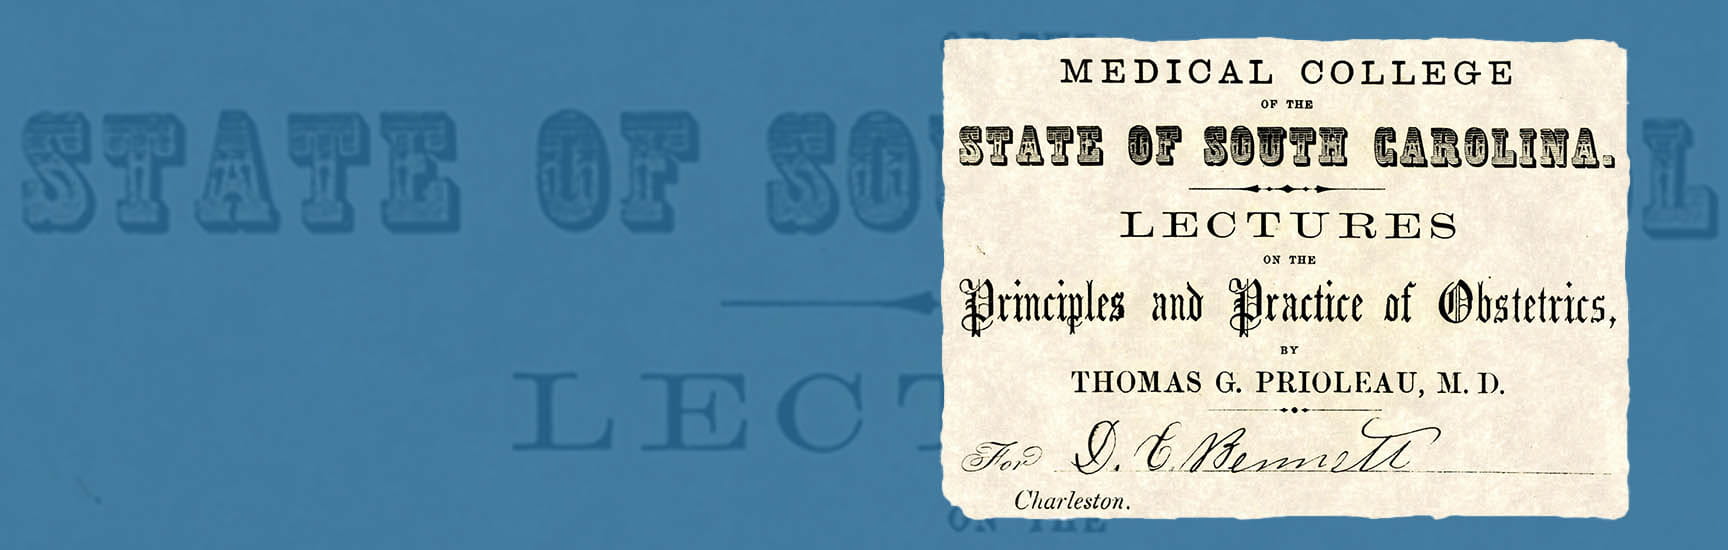 Text that reads: Medical College of the State of South Carolina Lectures on the Principles and Practice of Obstetrics, by Thomas G. Prioleau, M.D. A signature of the lecture attendee is at the bottom 